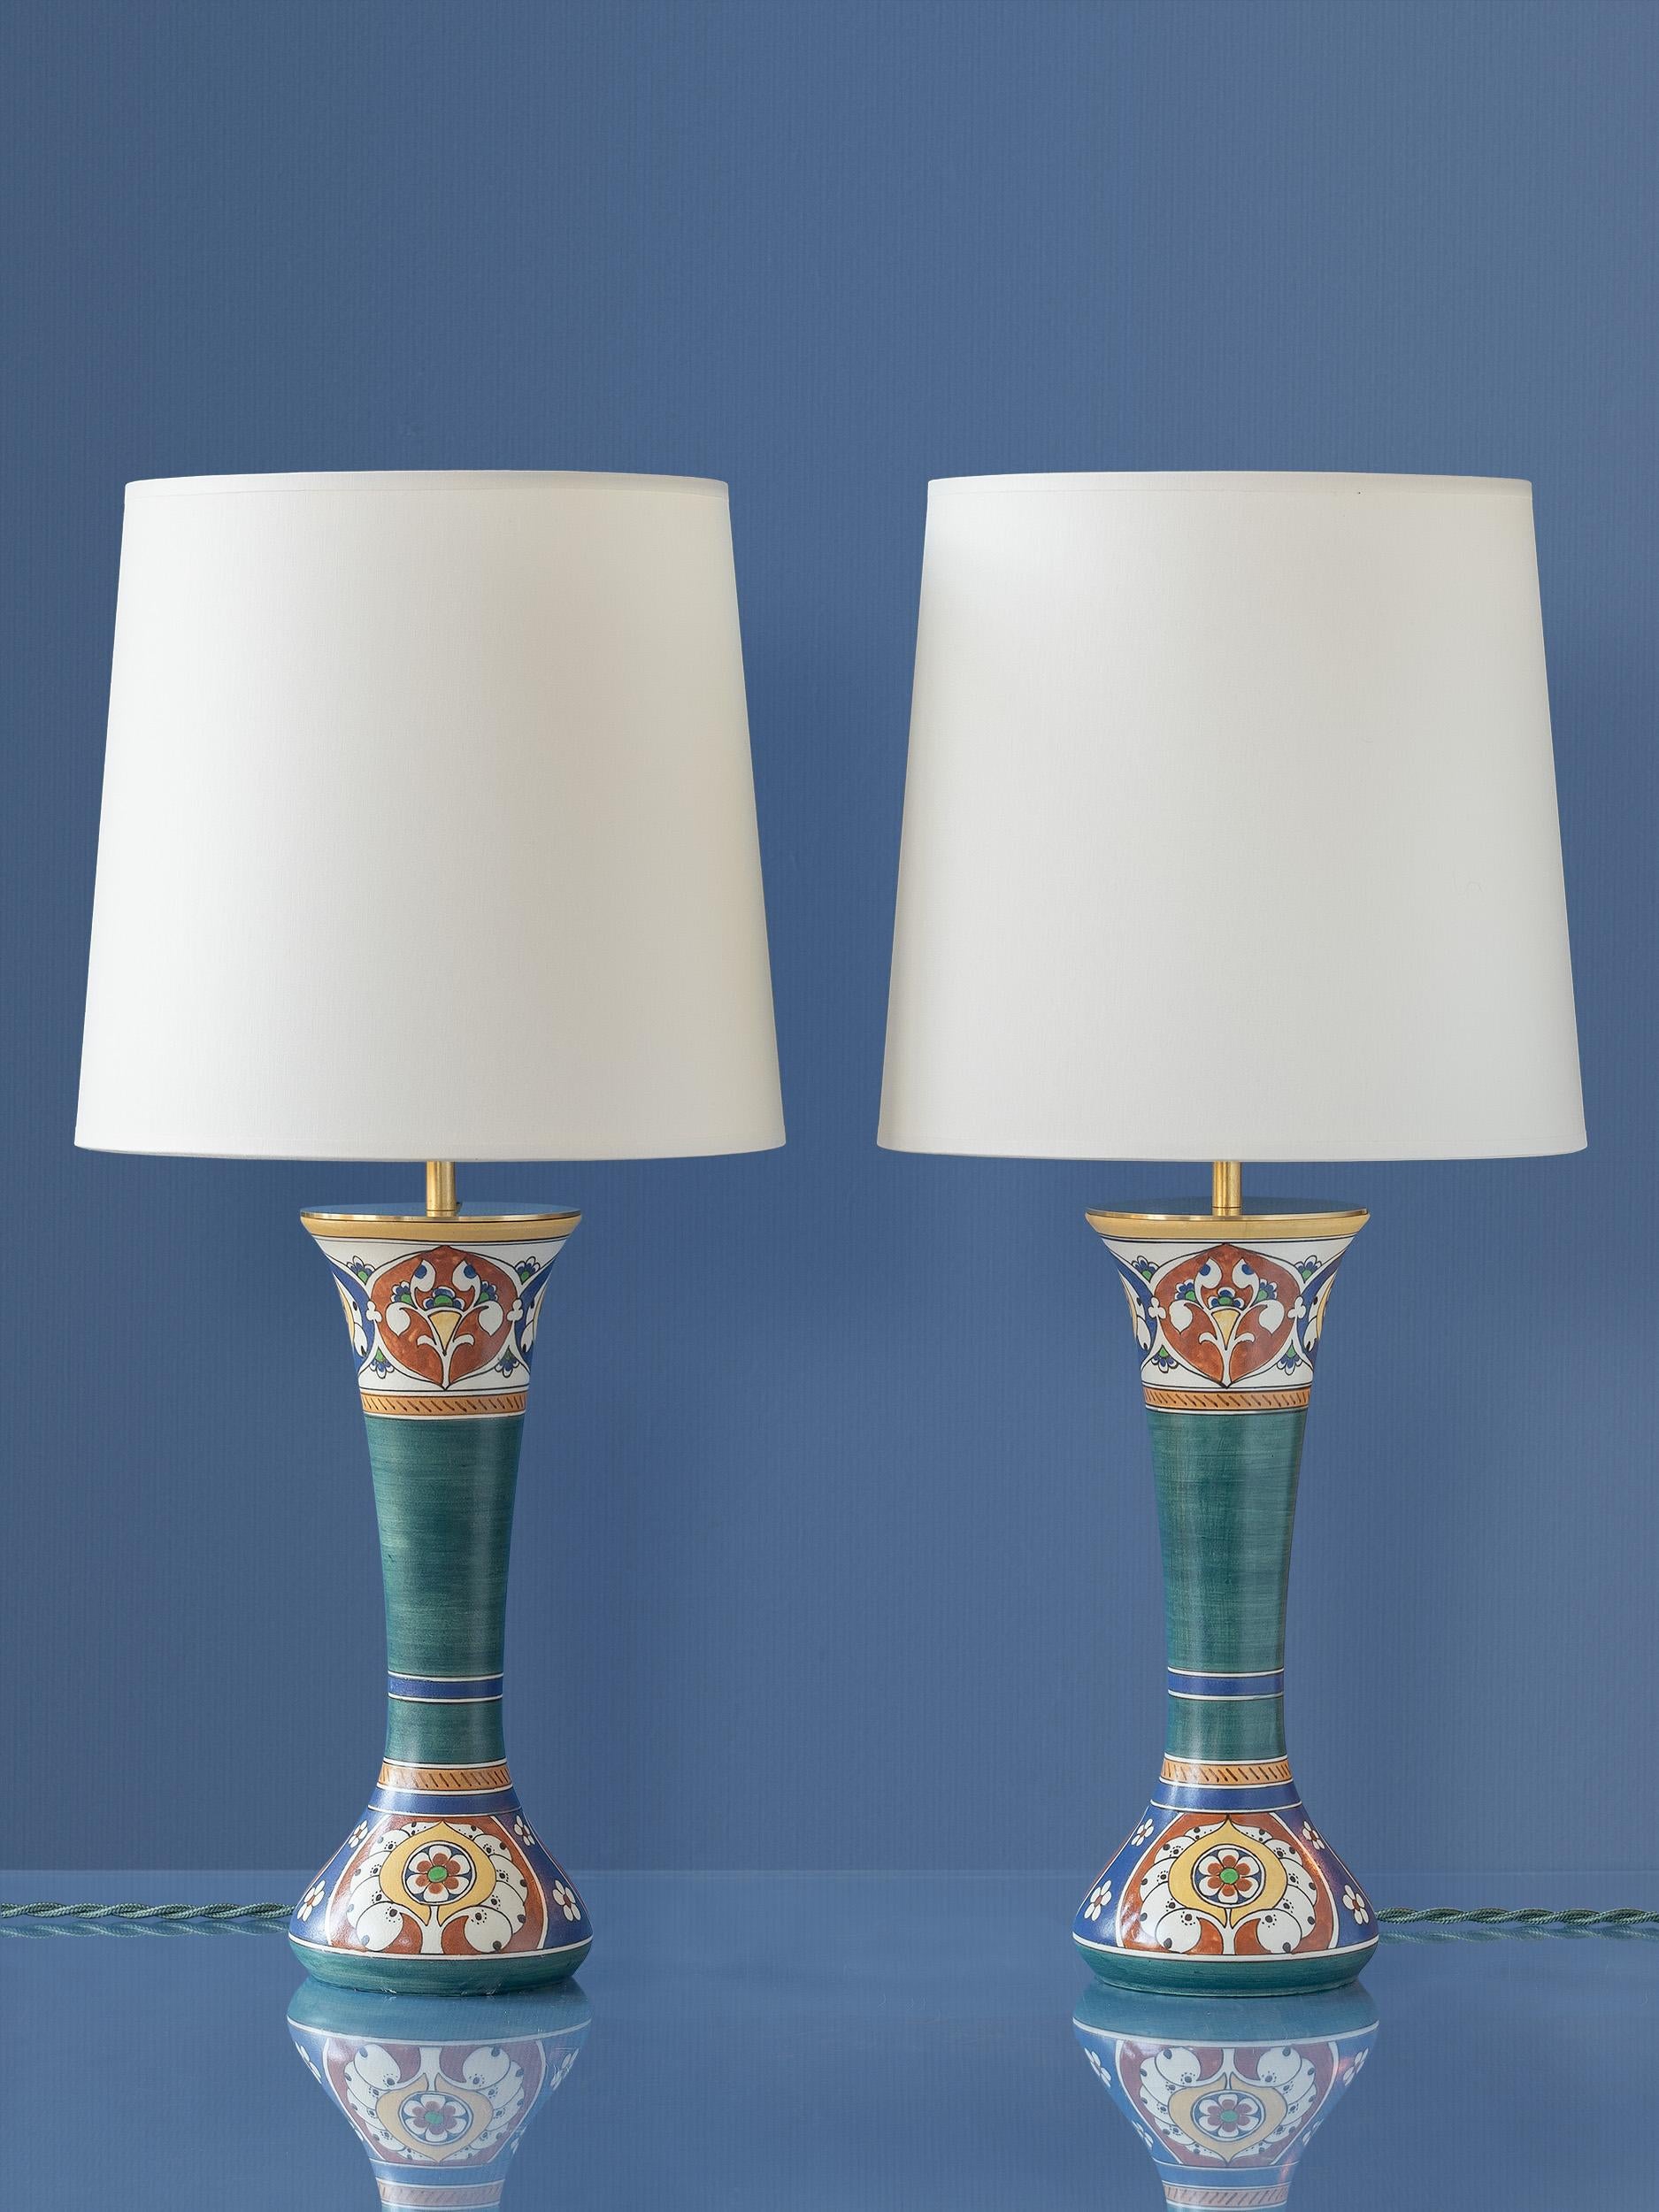 Meet Toni & Tini! This one-of-a-kind pair of lamps are lovingly handcrafted from antique, rare vases from the renowned Arnhemsche Fayencefabriek. Each vase, forming the lamp's base, is a testament to the superb artistry of the past, featuring